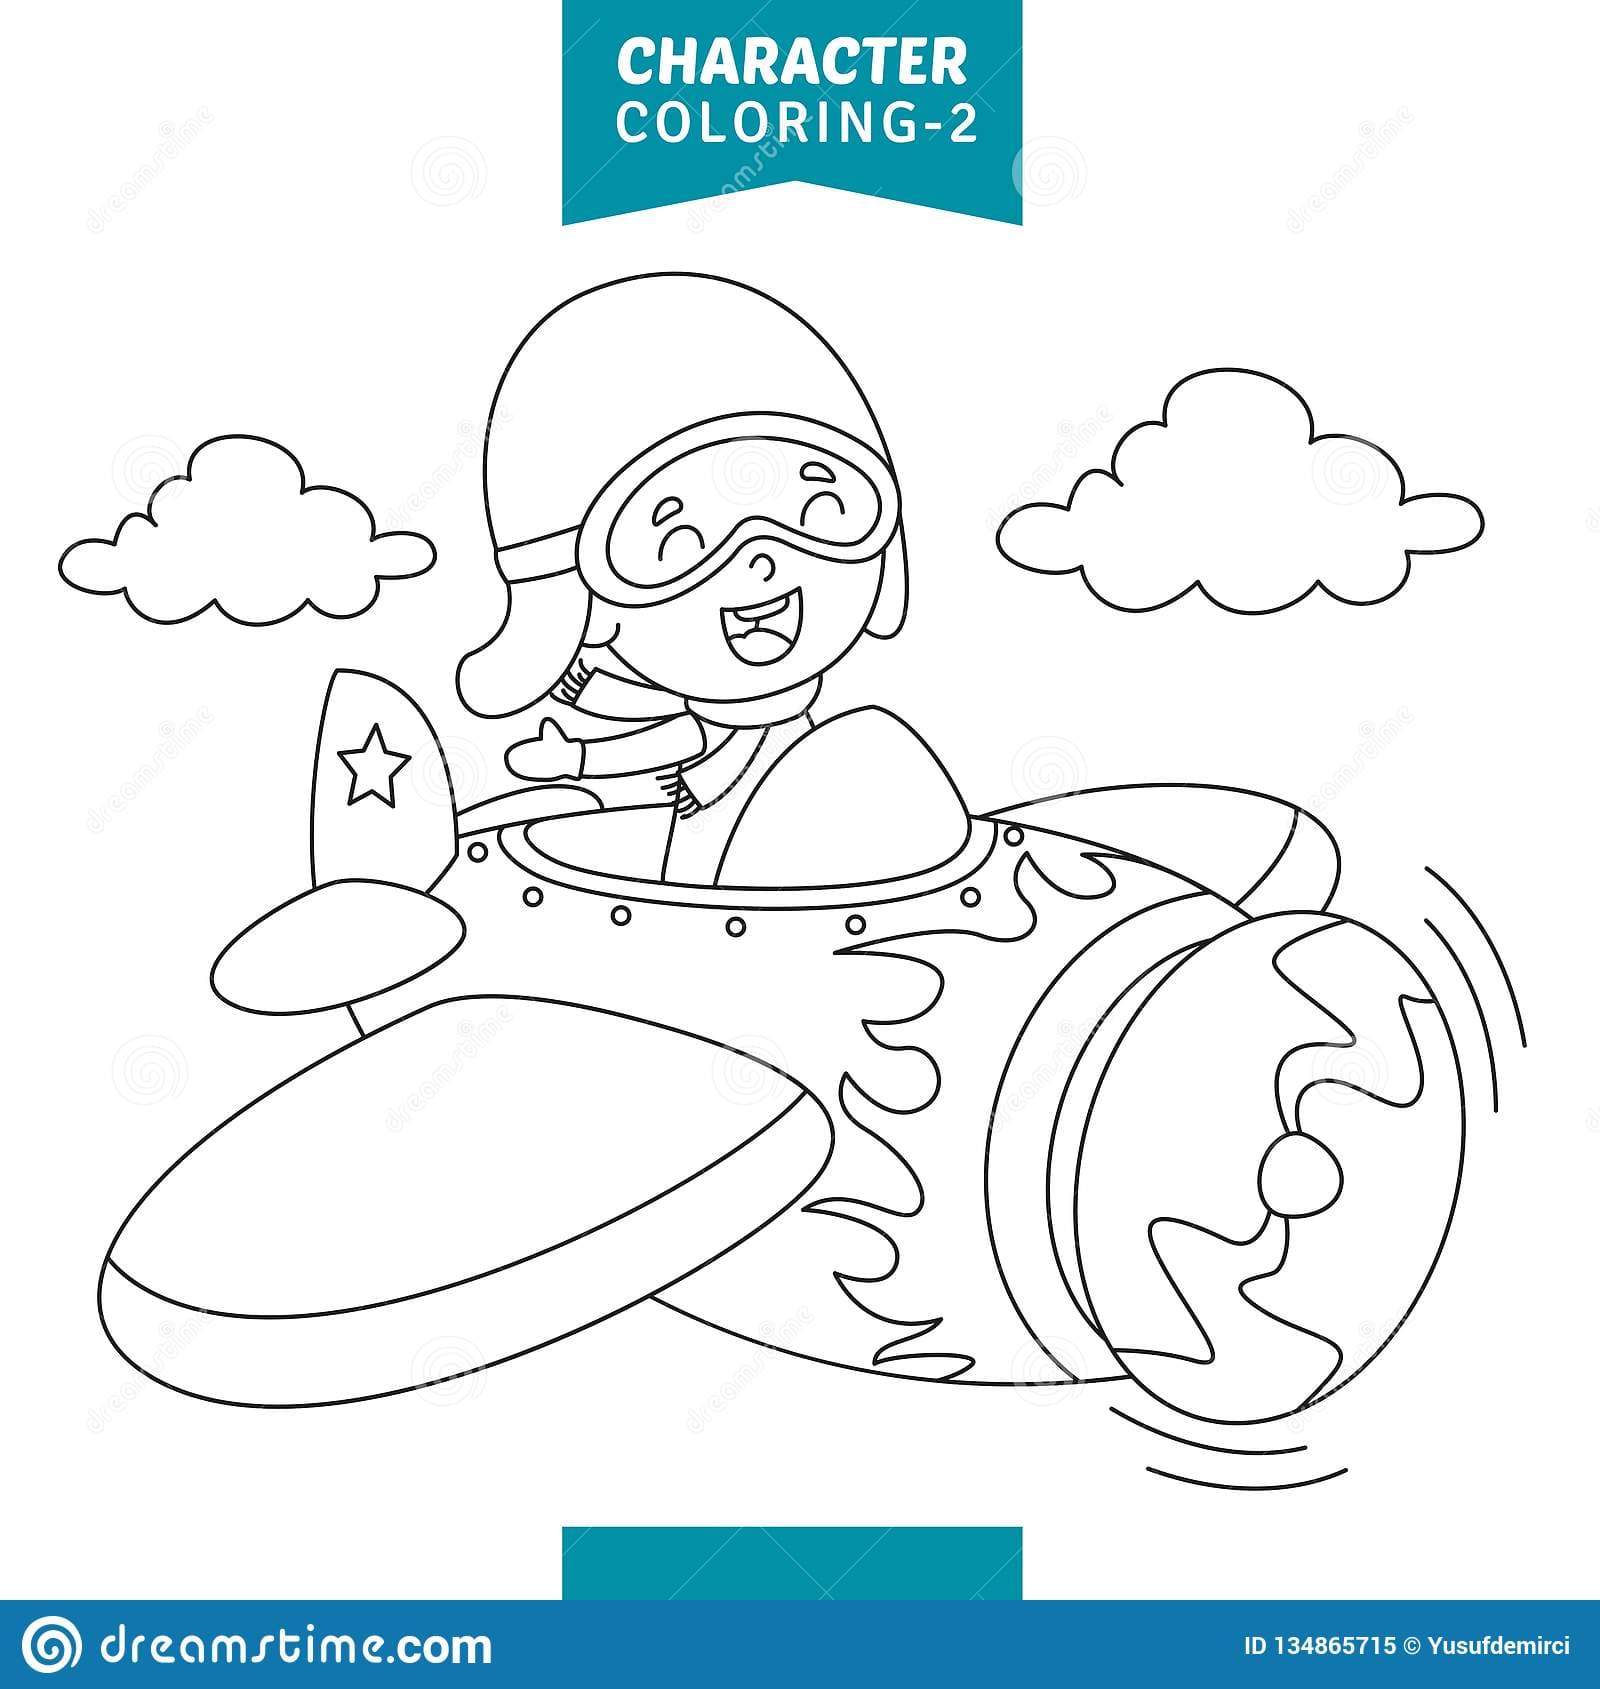 An Astronaut Of Character Coloring Page